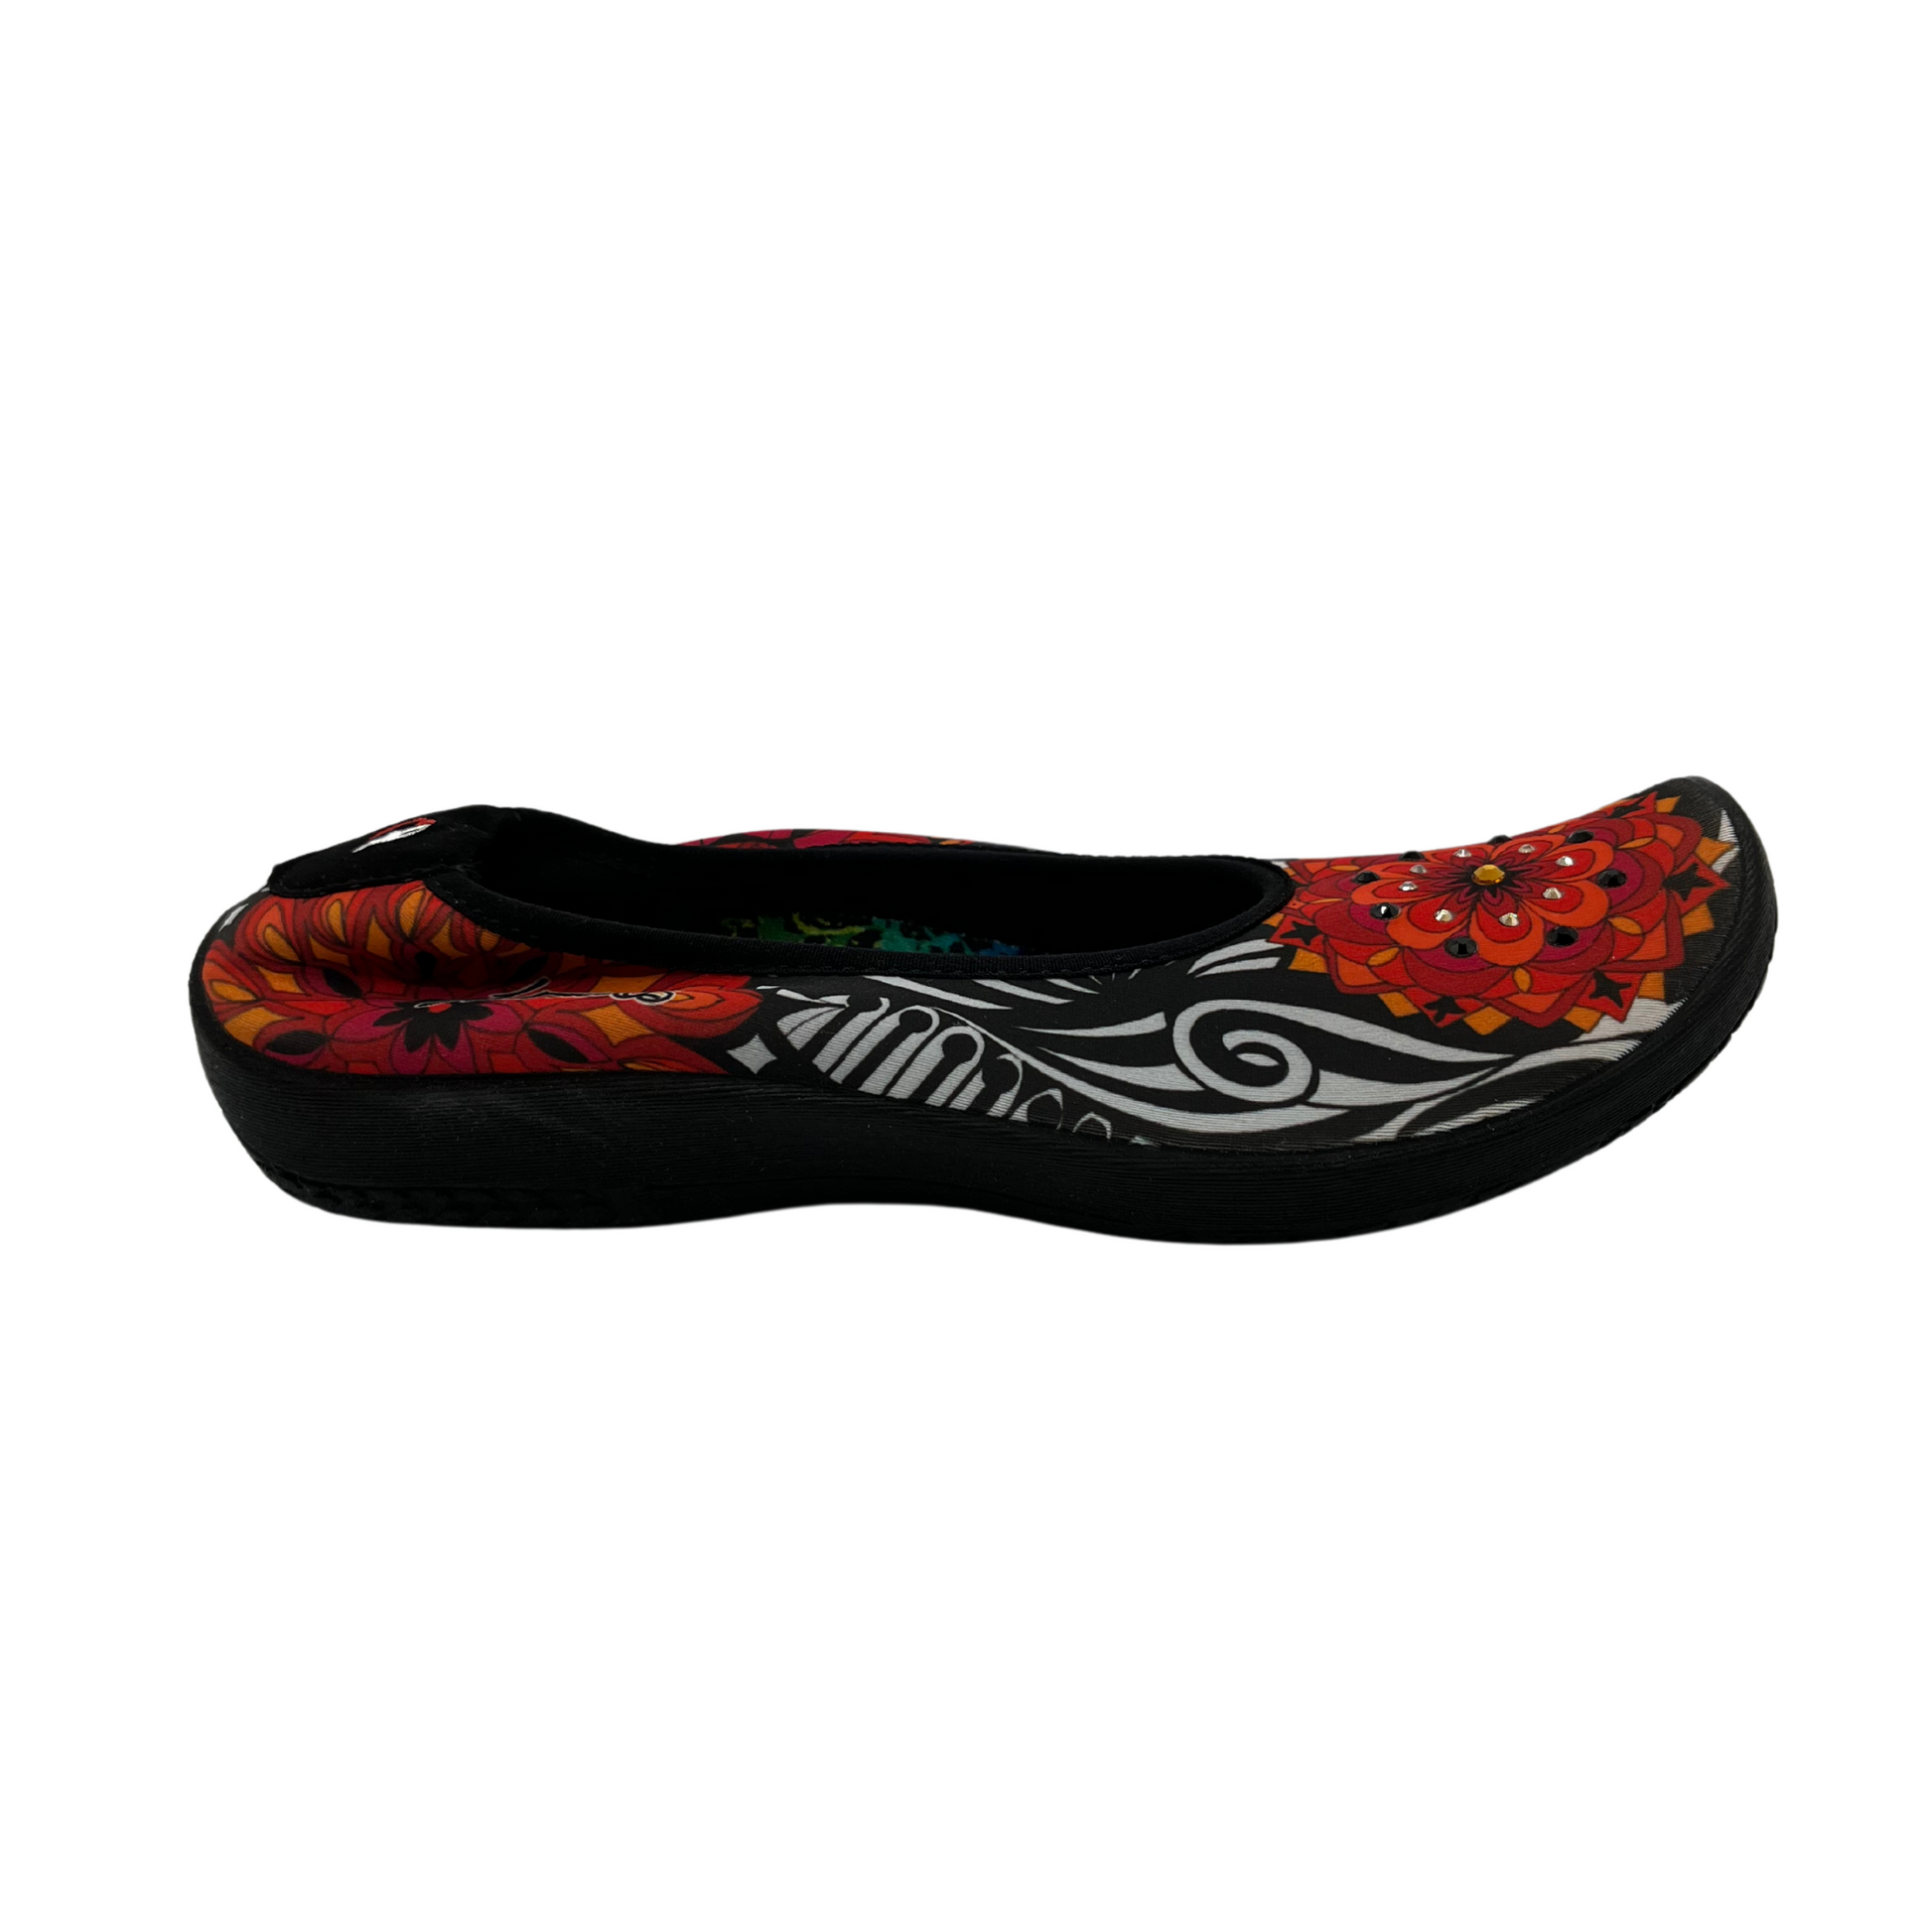 Right facing view of ballet flat with floral pattern on stretchy upper.